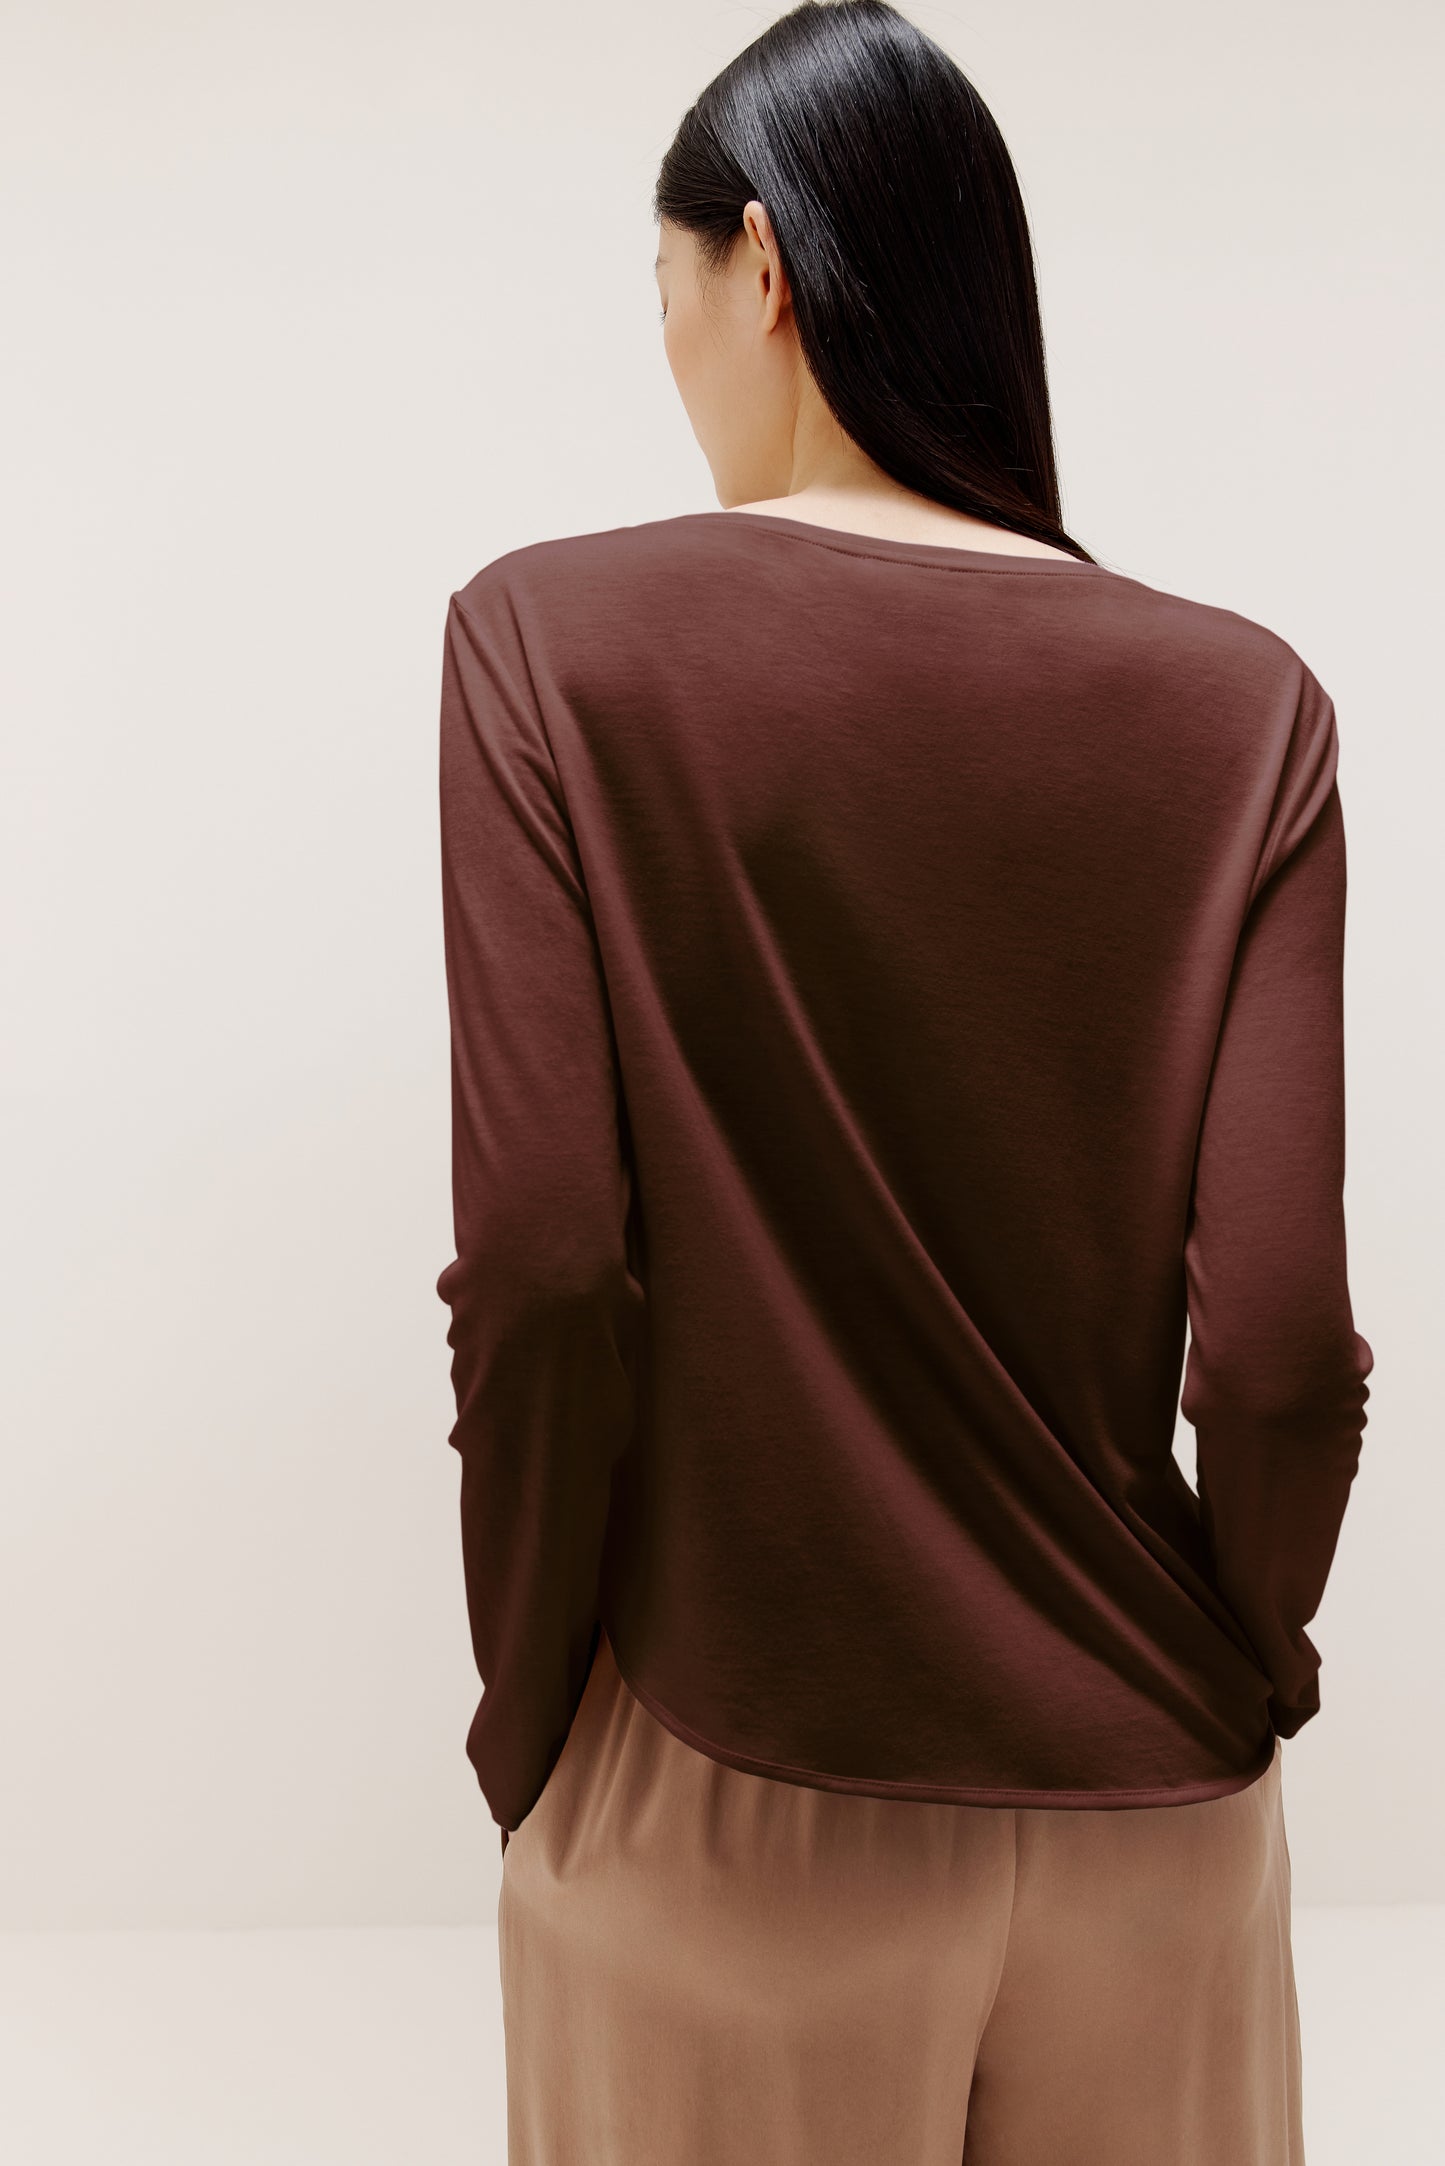 A woman wears a brown sweater and beige pants from back.